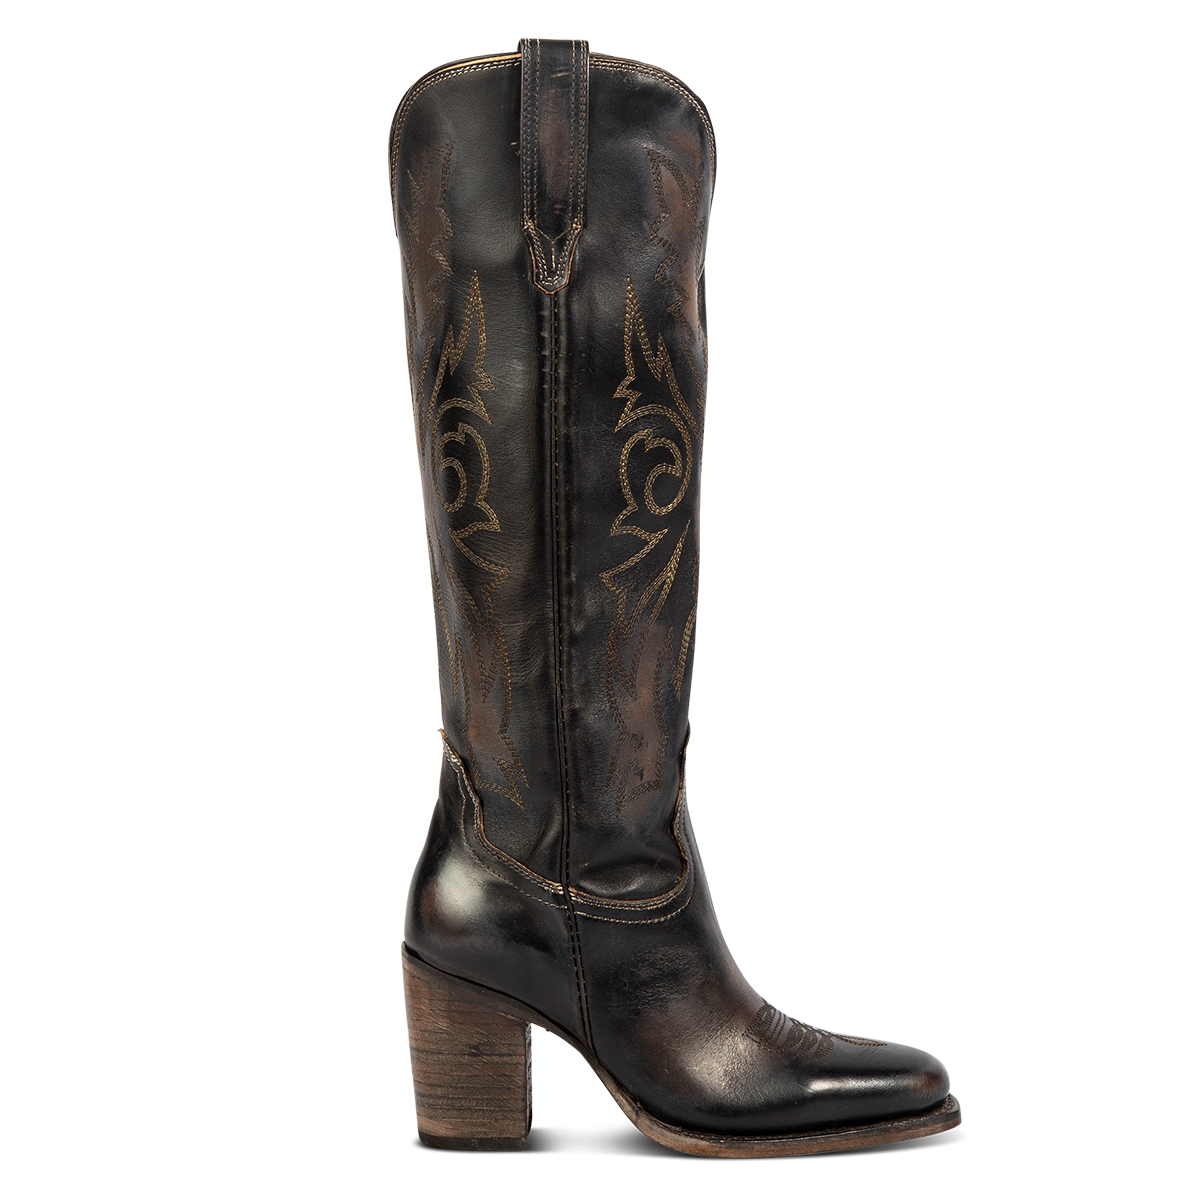 FREEBIRD women's Panama black leather elevated cowboy boot with shaft stitch detailing, inside working brass zipper, stacked heel and a snip toe